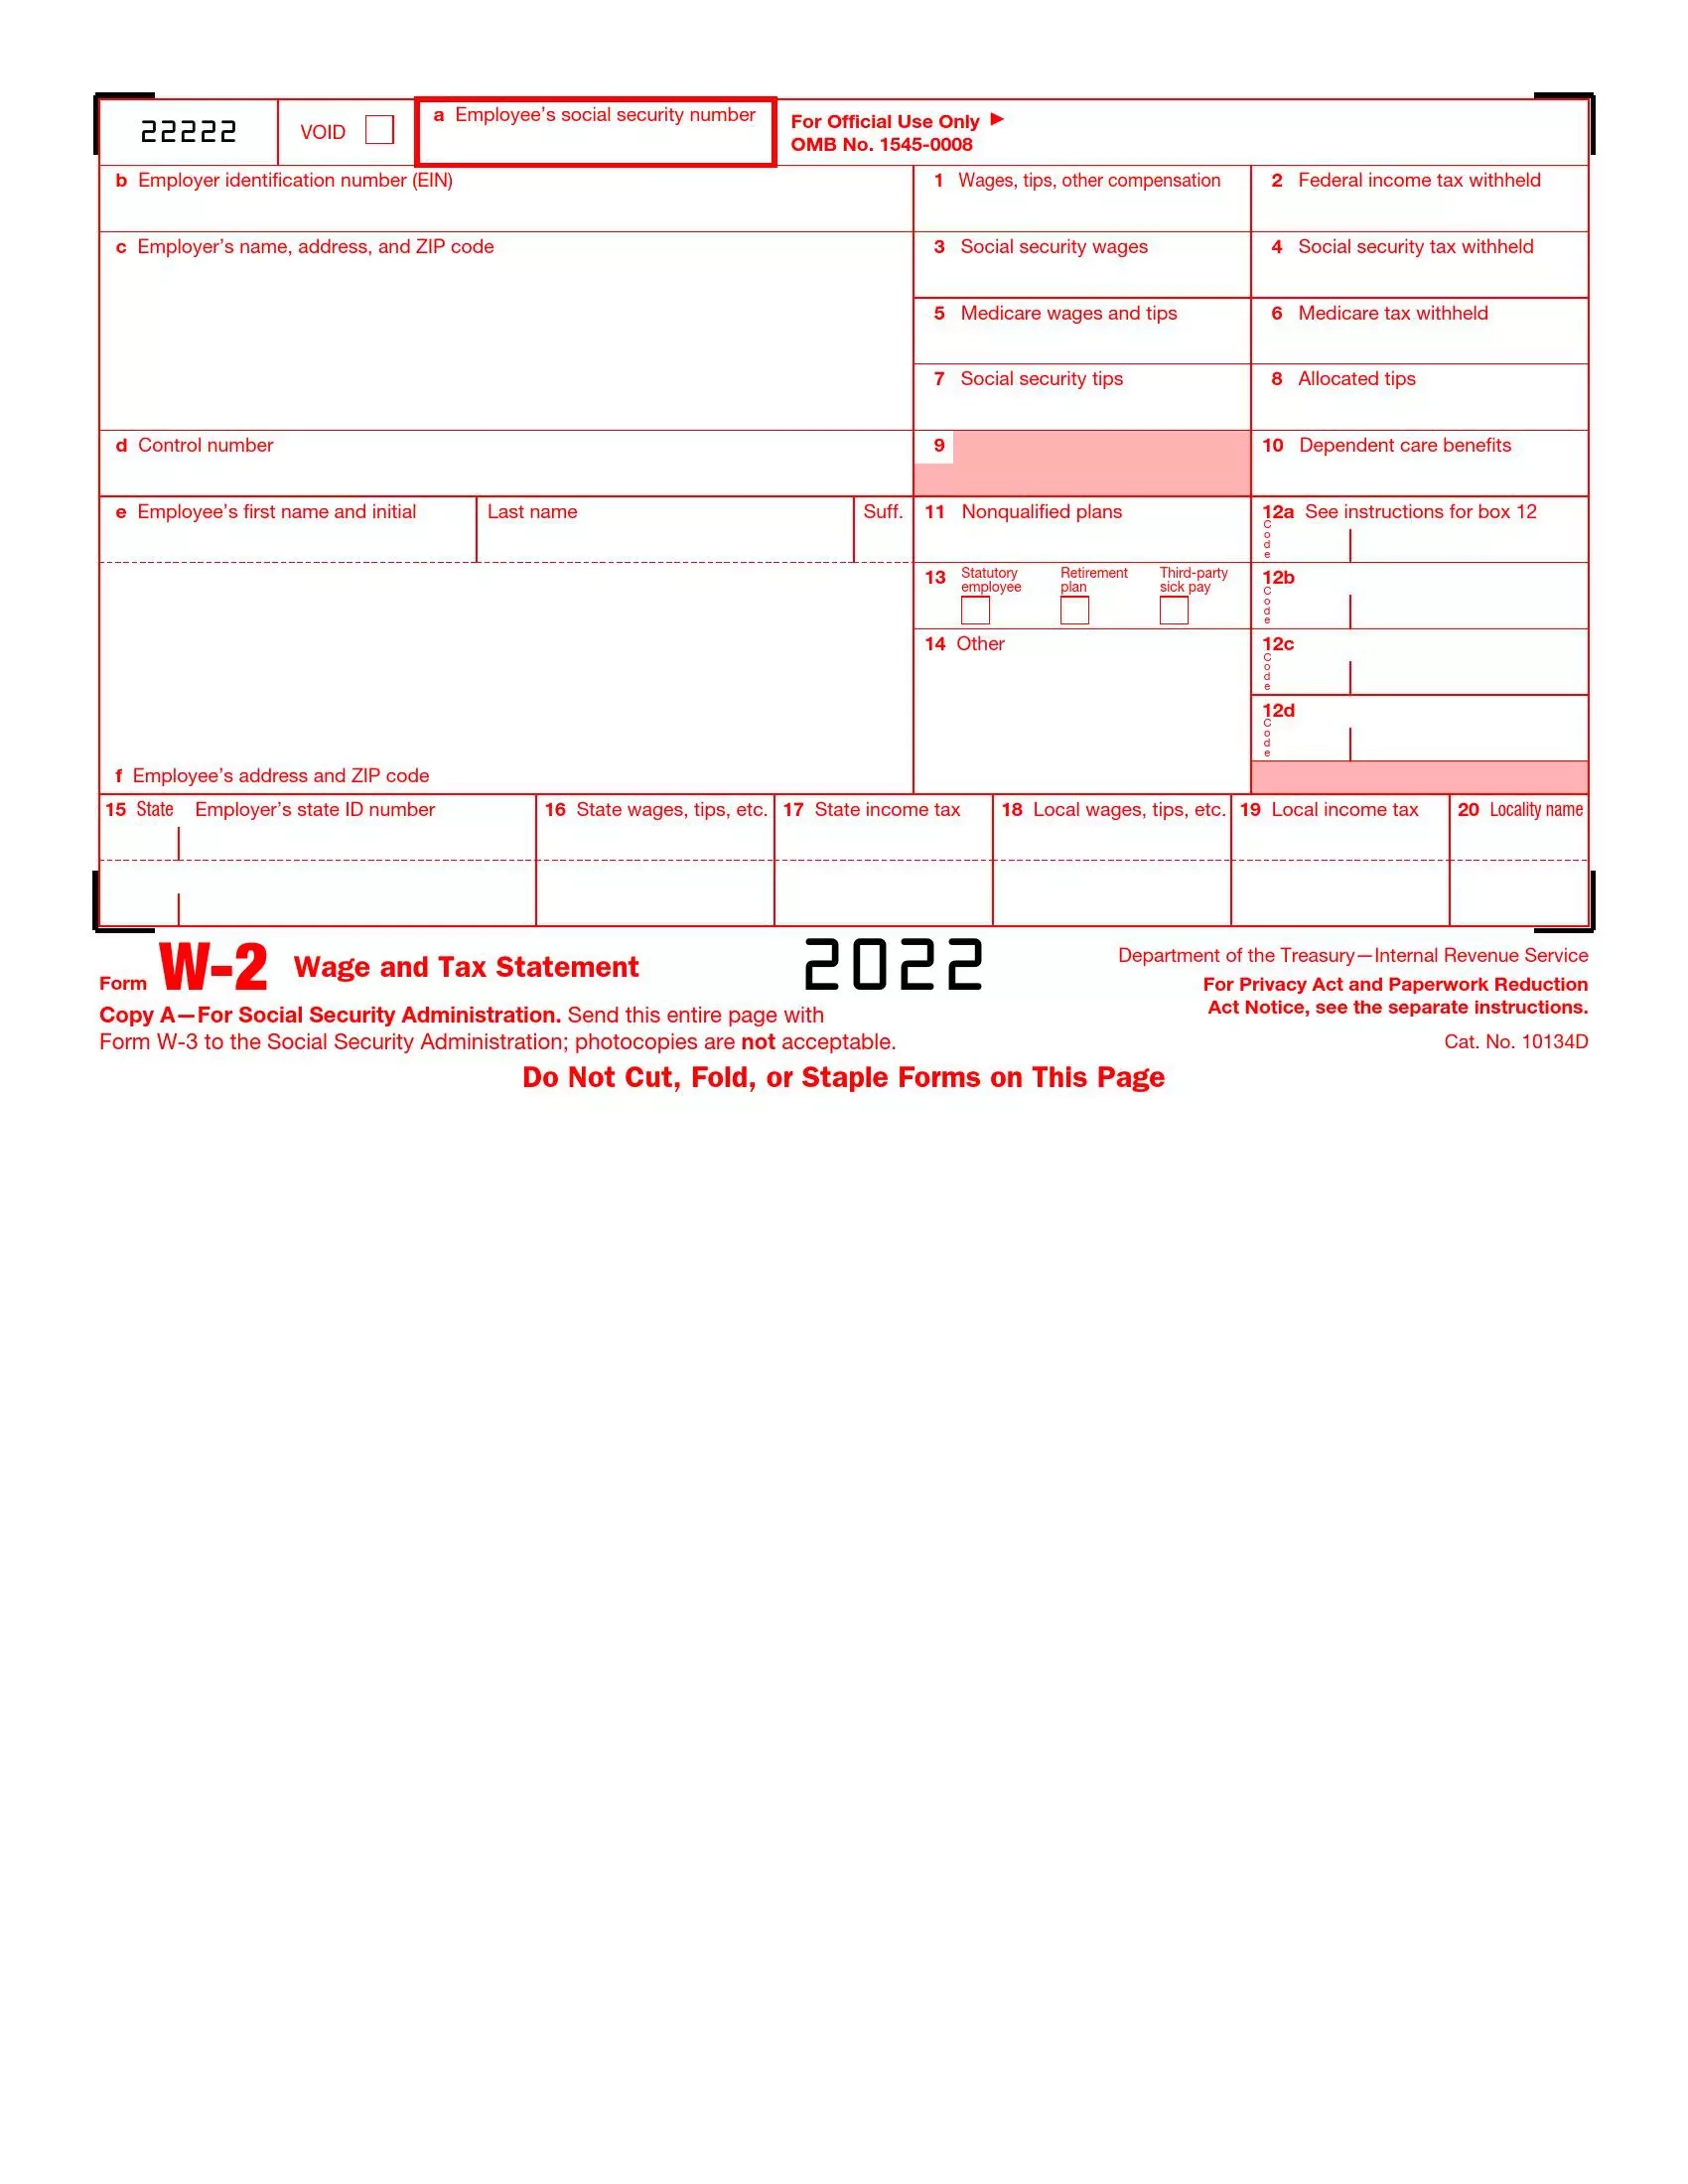 Irs Form W-2 ≡ Fill Out Printable Pdf Forms Online pertaining to Fillable W2 Form